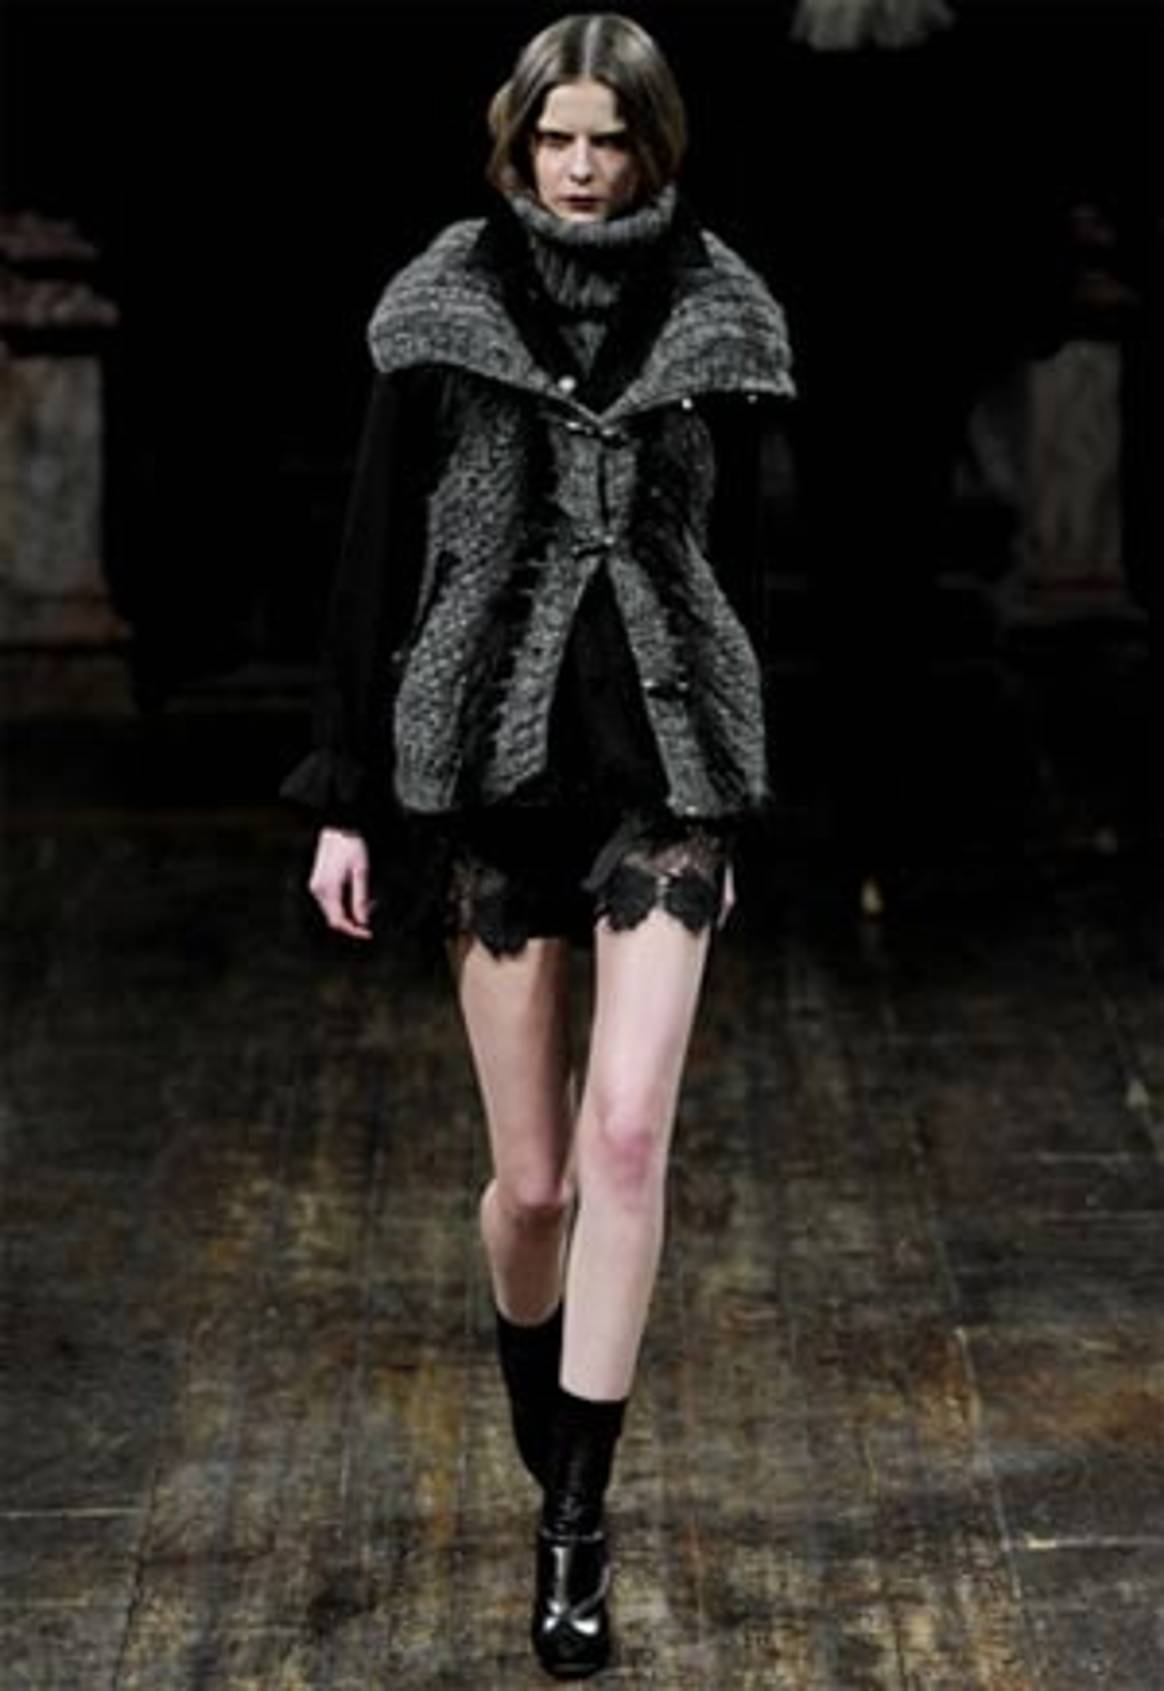 A/W11 trends from LFW